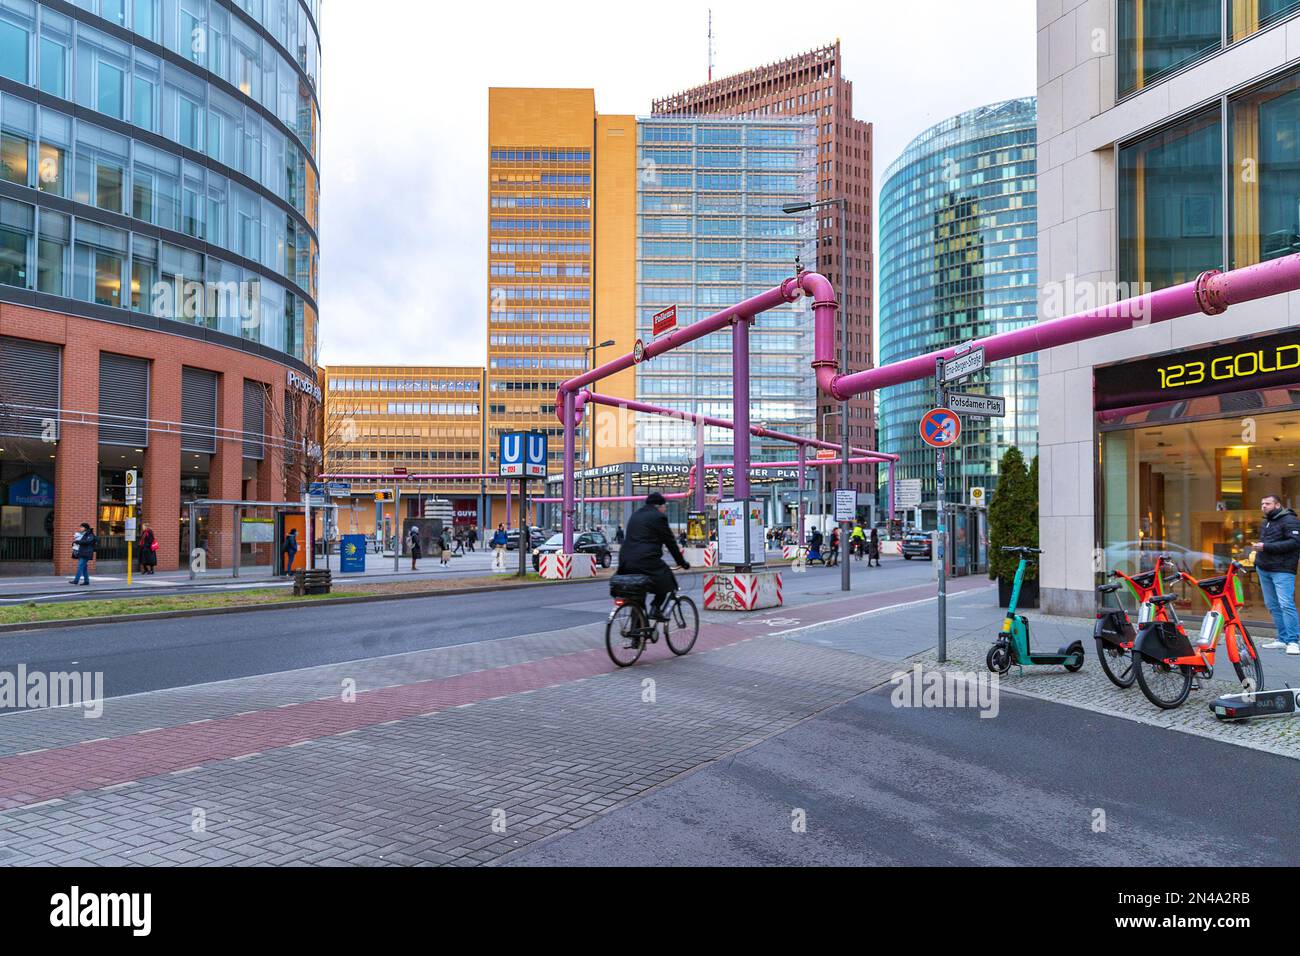 A bike path or a cycle path in Berlin, Germany. People and cyclists on the street in Berlin.Berlin architecture. S-Bahn sign. Stock Photo